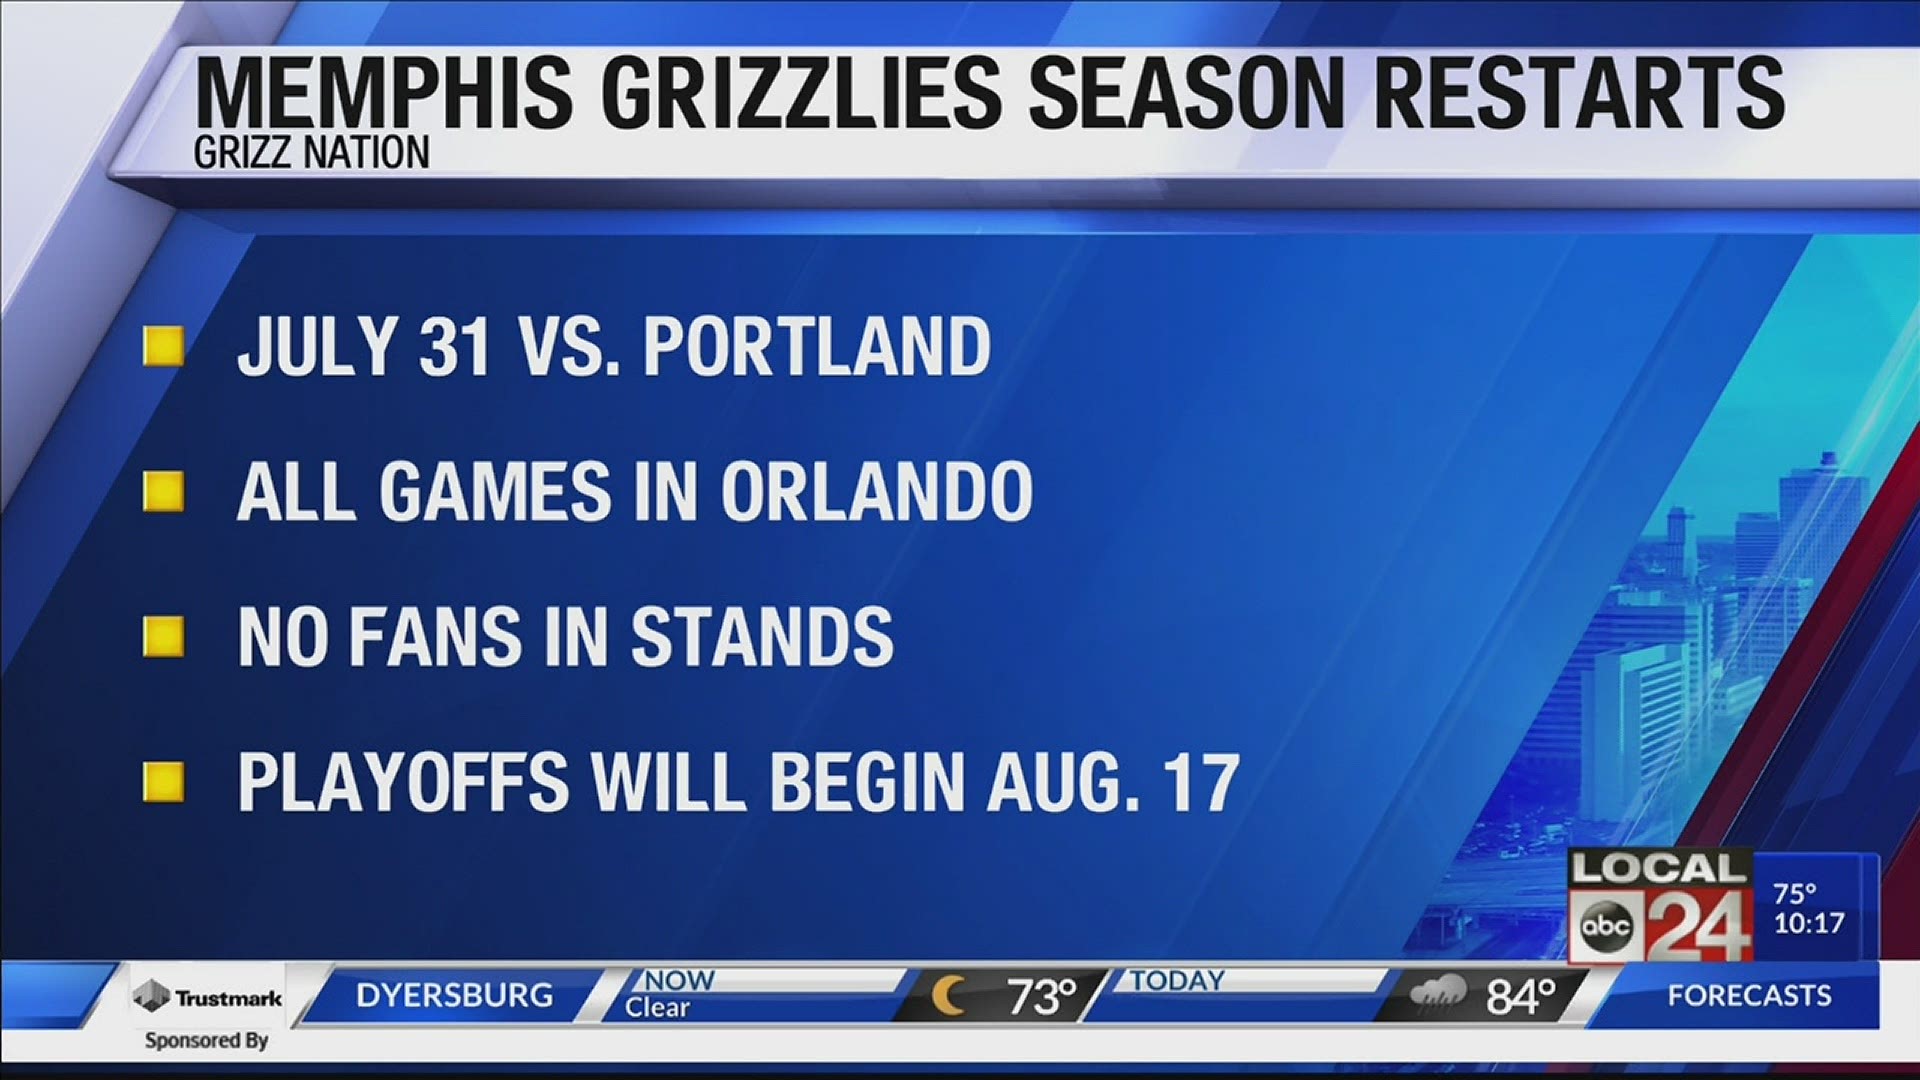 Grizzlies are one of 22 teams that will be resuming the season to compete in 8 “seeding games” to determine the participants and order for the 2020 NBA Playoffs.